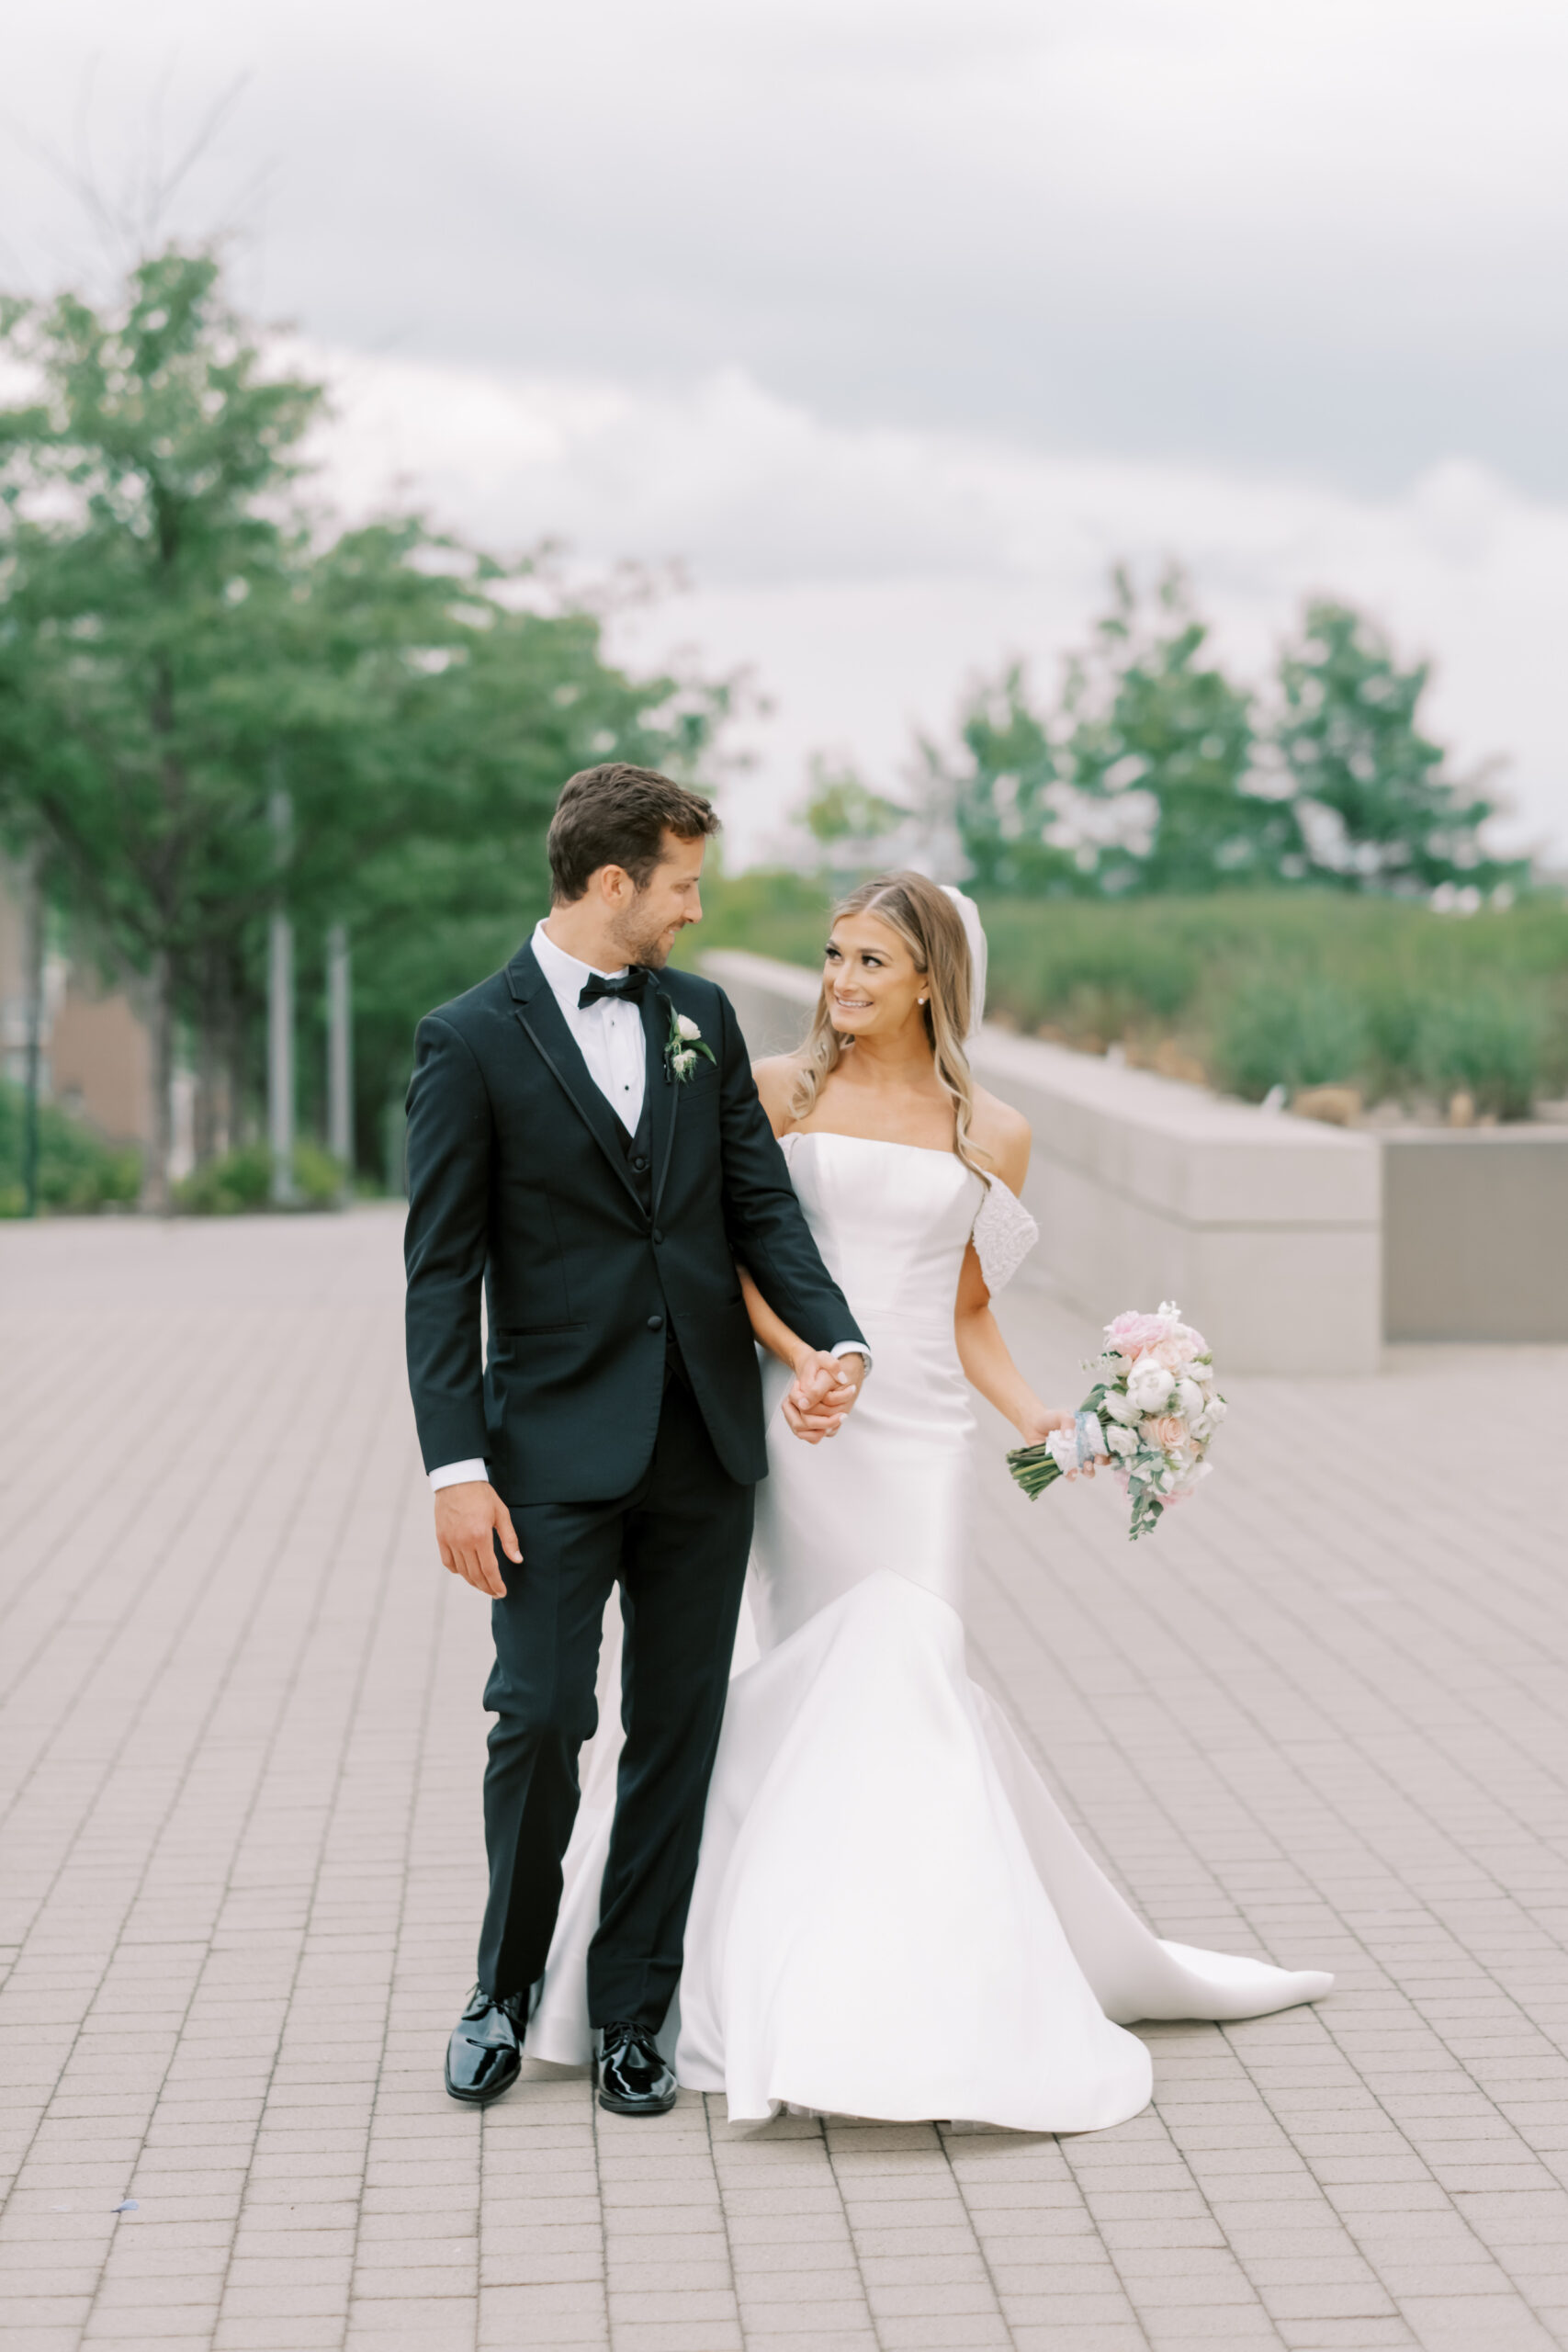 traditional June wedding at The Abbott in downtown Kansas City